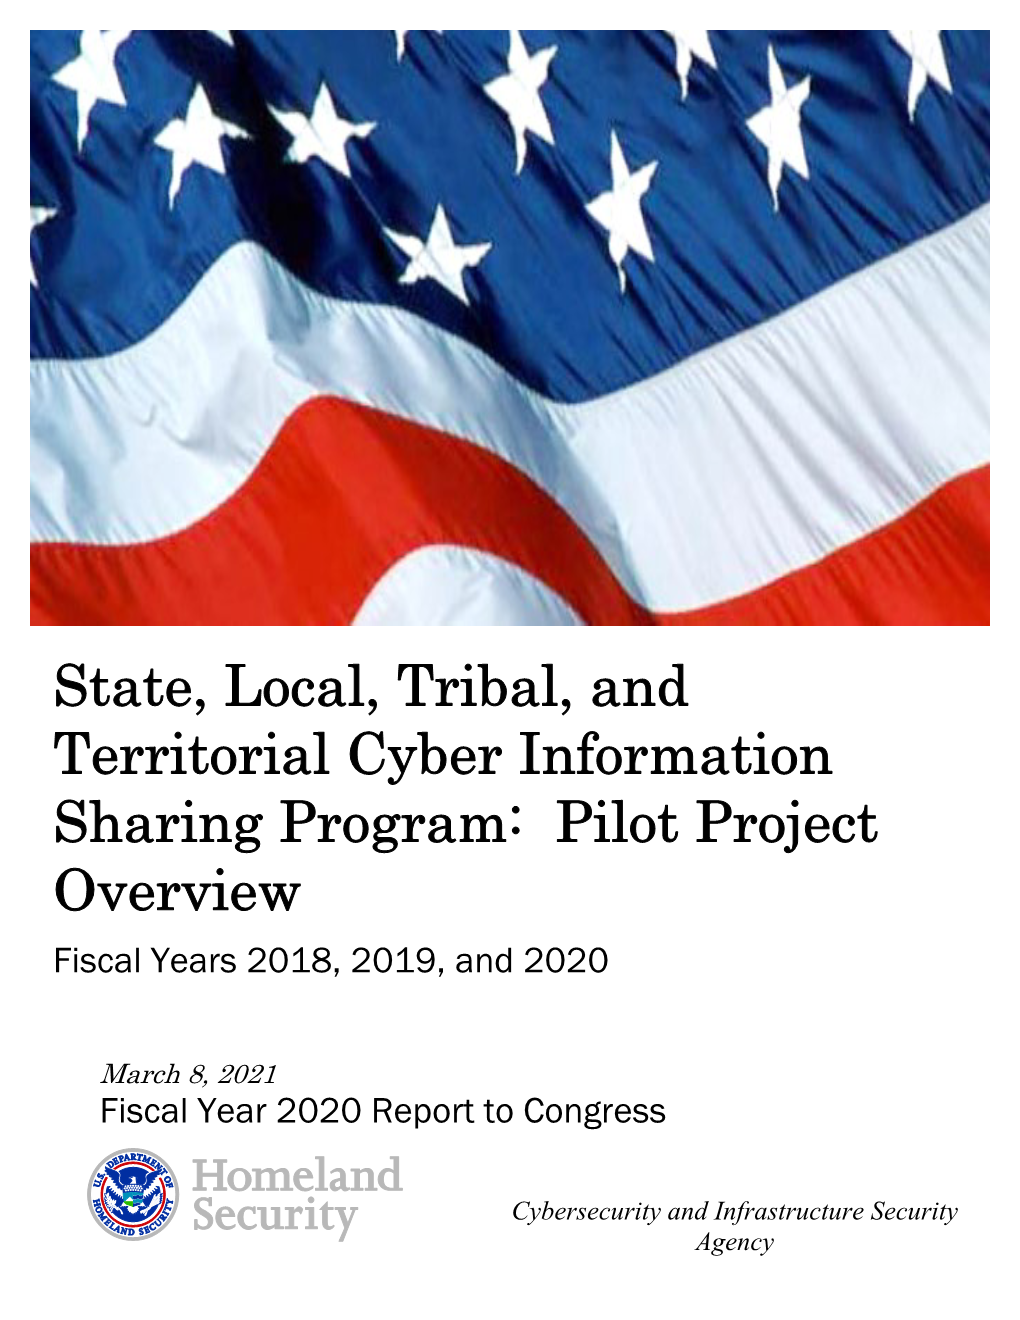 State, Local, Tribal, and Territorial Cyber Information Sharing Program: Pilot Project Overview Fiscal Years 2018, 2019, and 2020